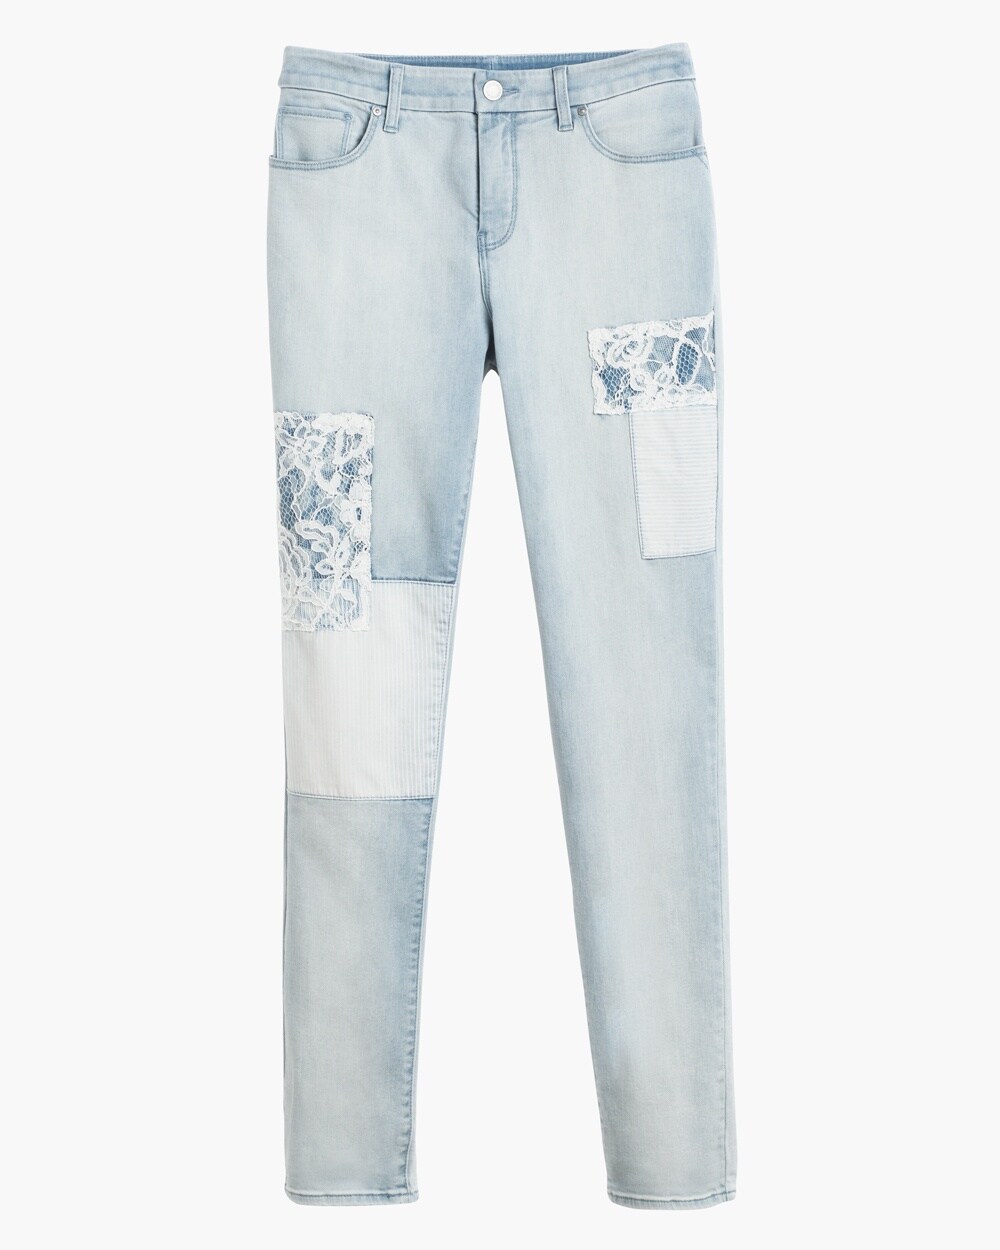 So Slimming Patchwork Girlfriend Ankle Jeans - Chico's